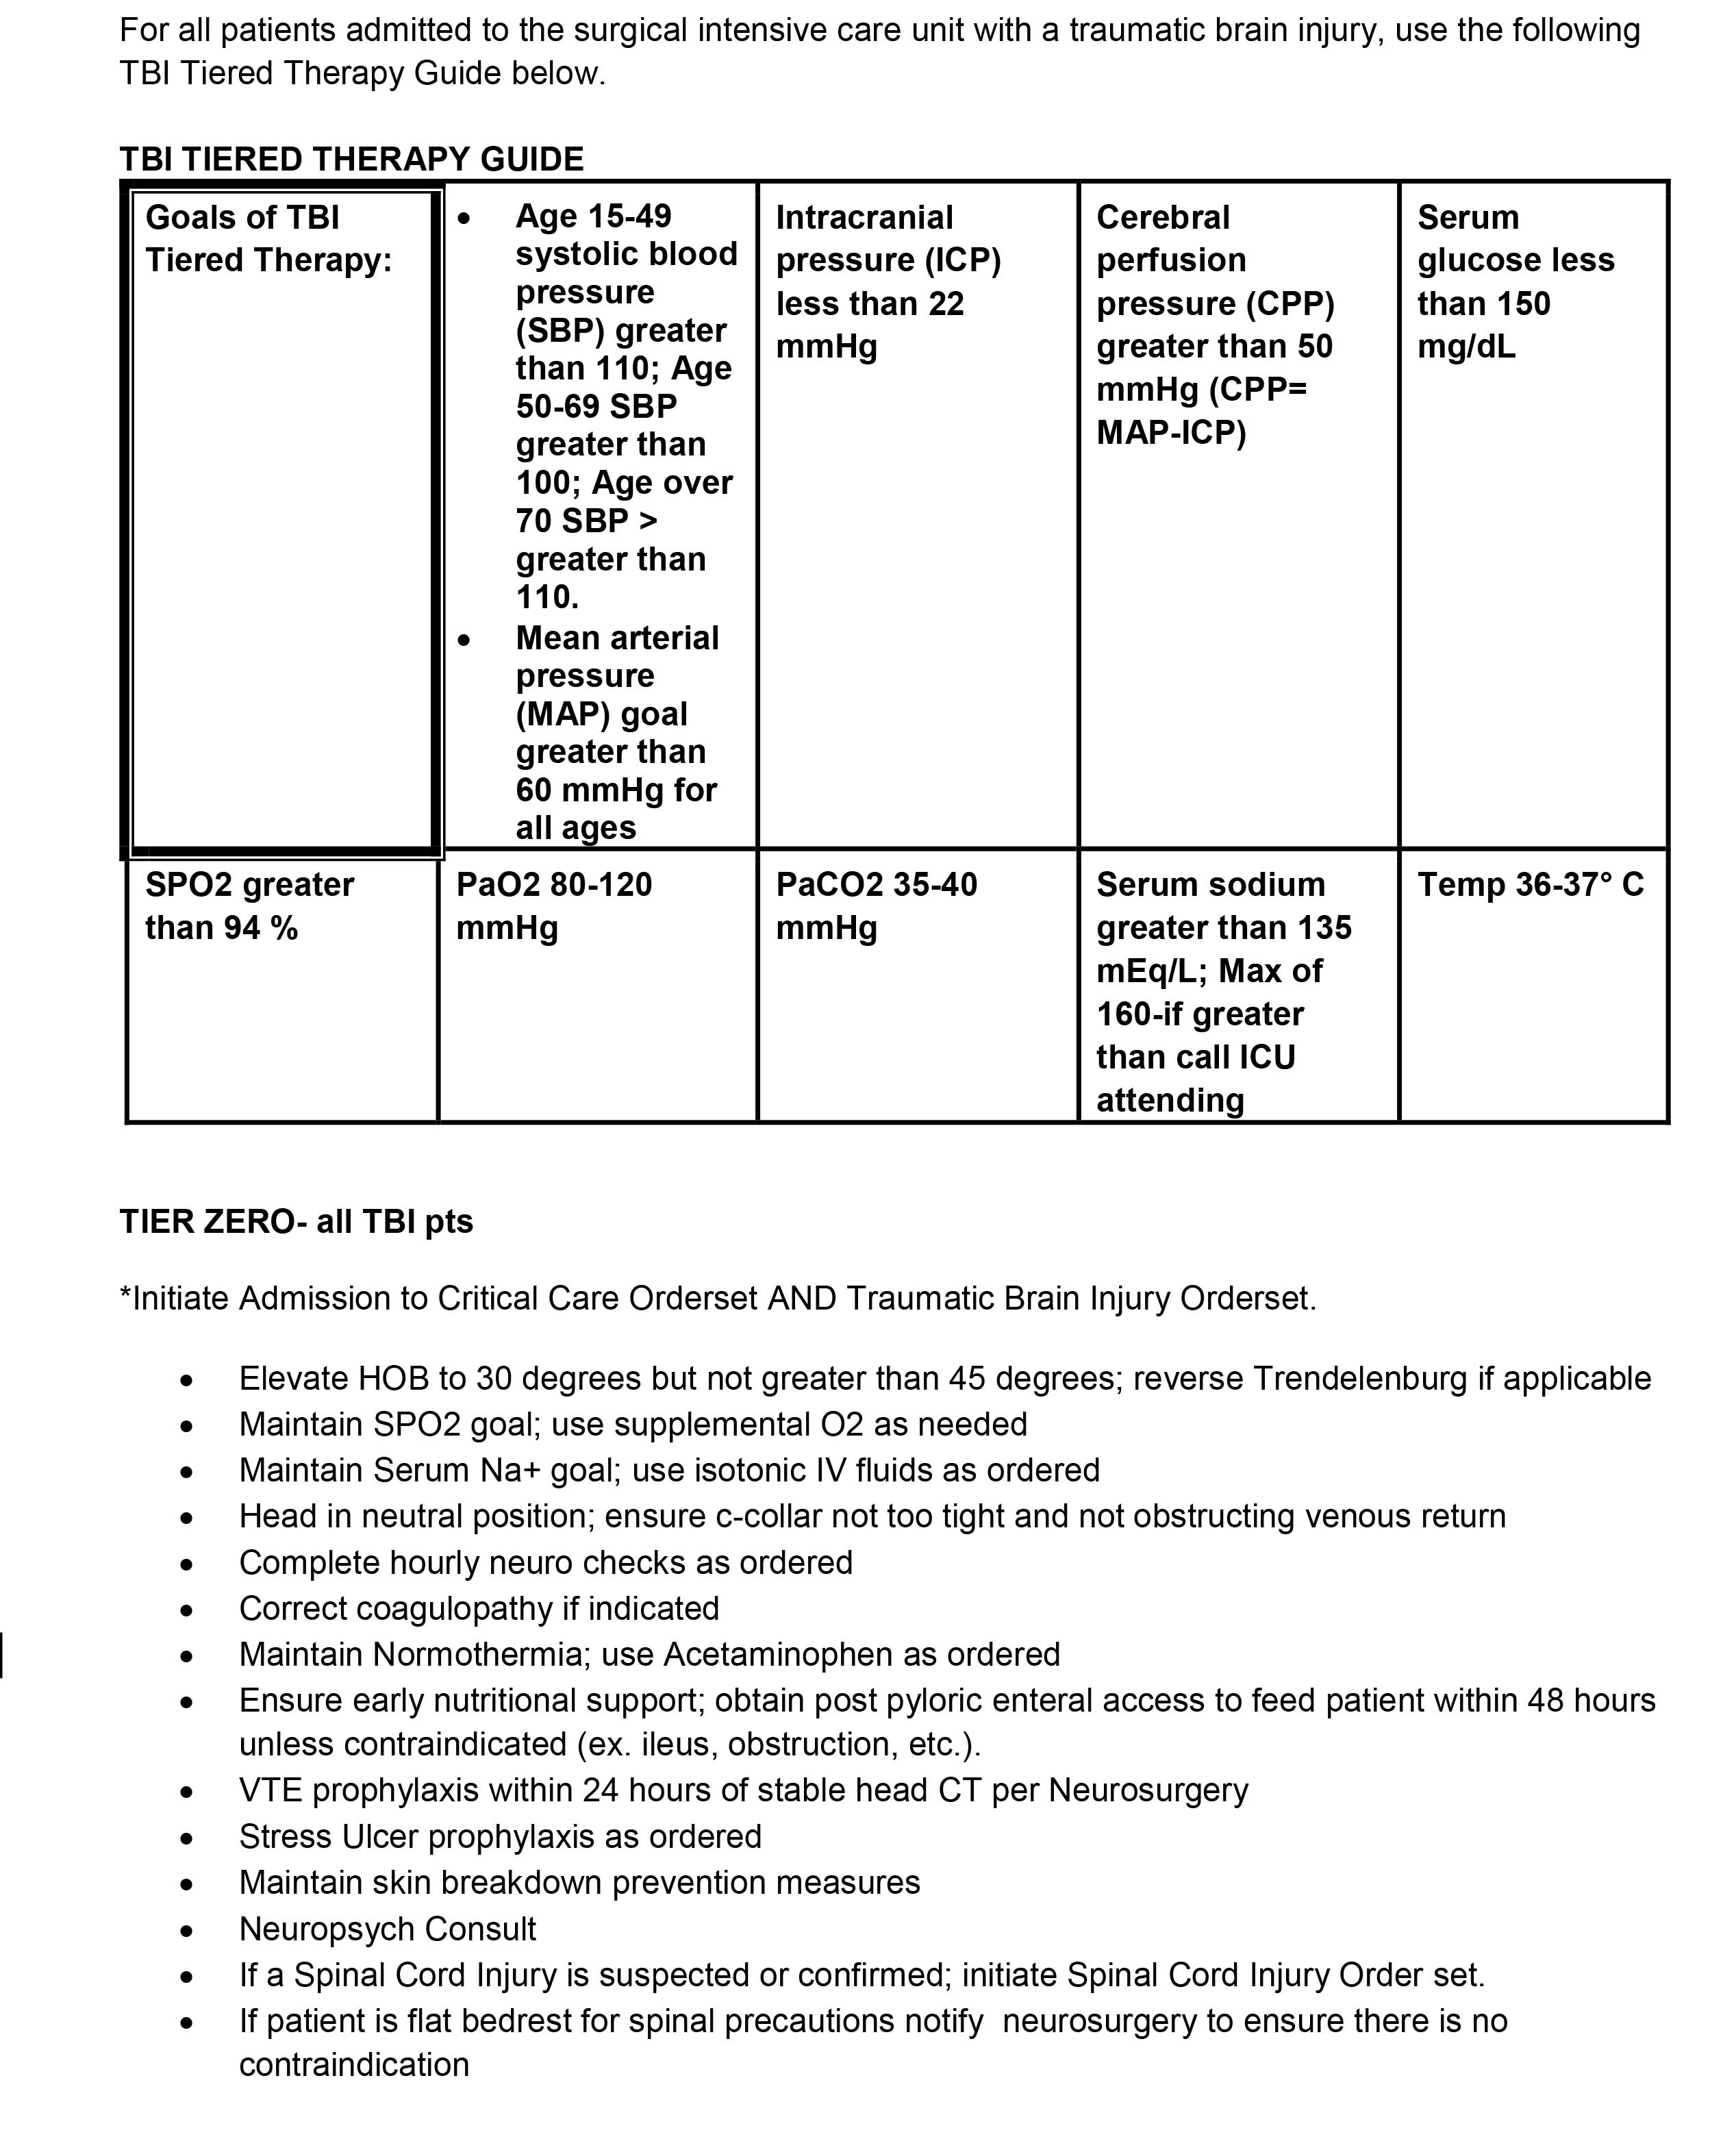 Clinical Pathways Document Image 4